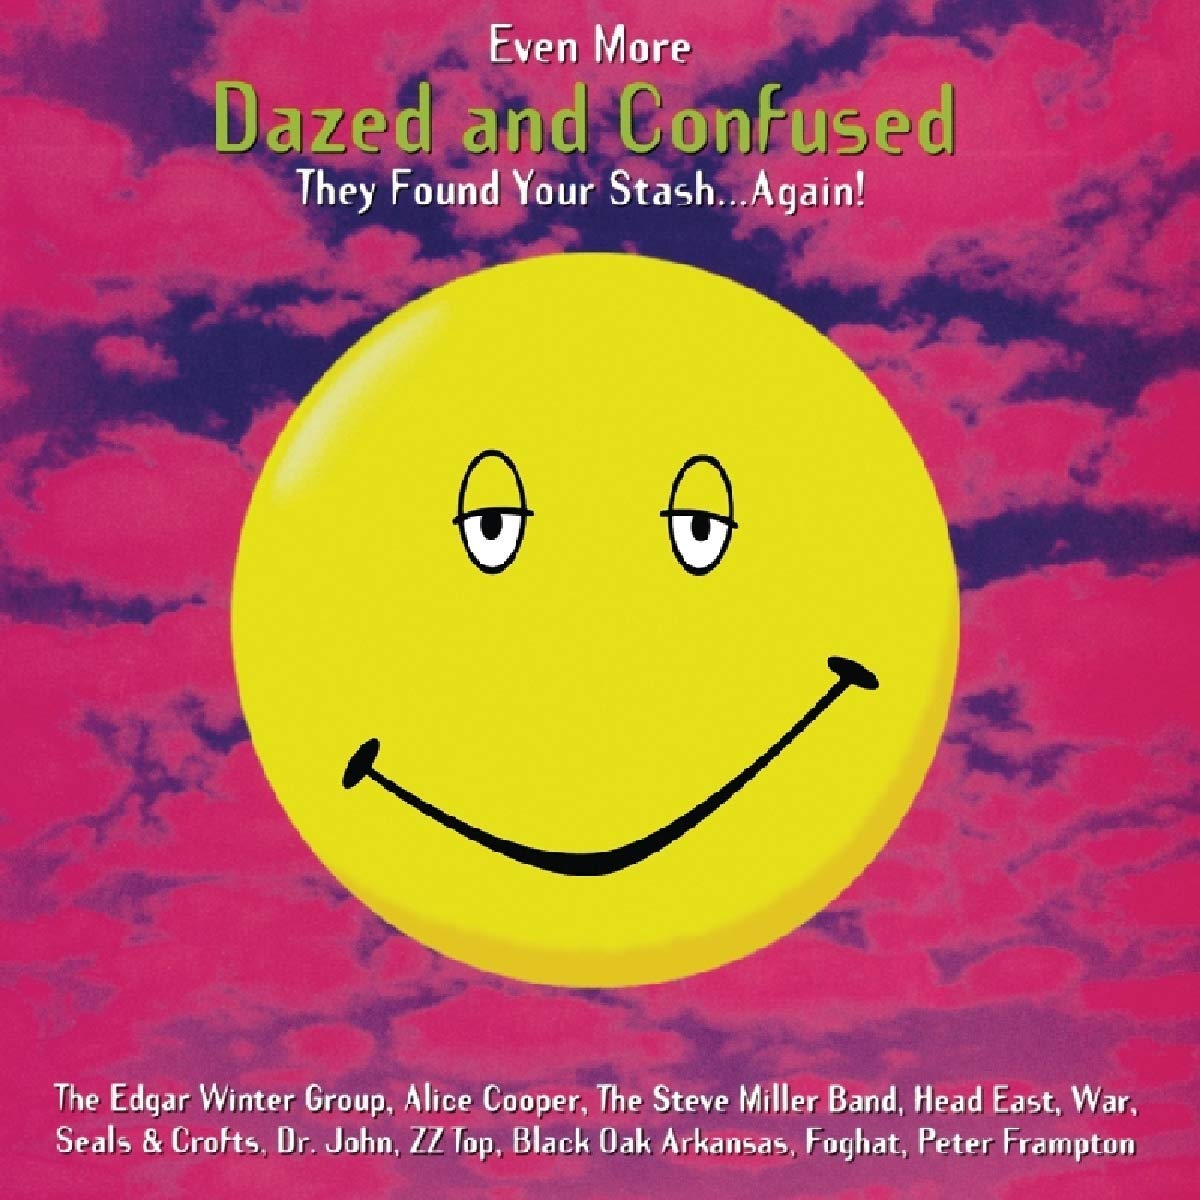 V.A. (ROCK GIANTS) / EVEN MORE DAZED AND CONFUSED: MUSIC FROM THE MOTION PICTURE (COLORED LP)